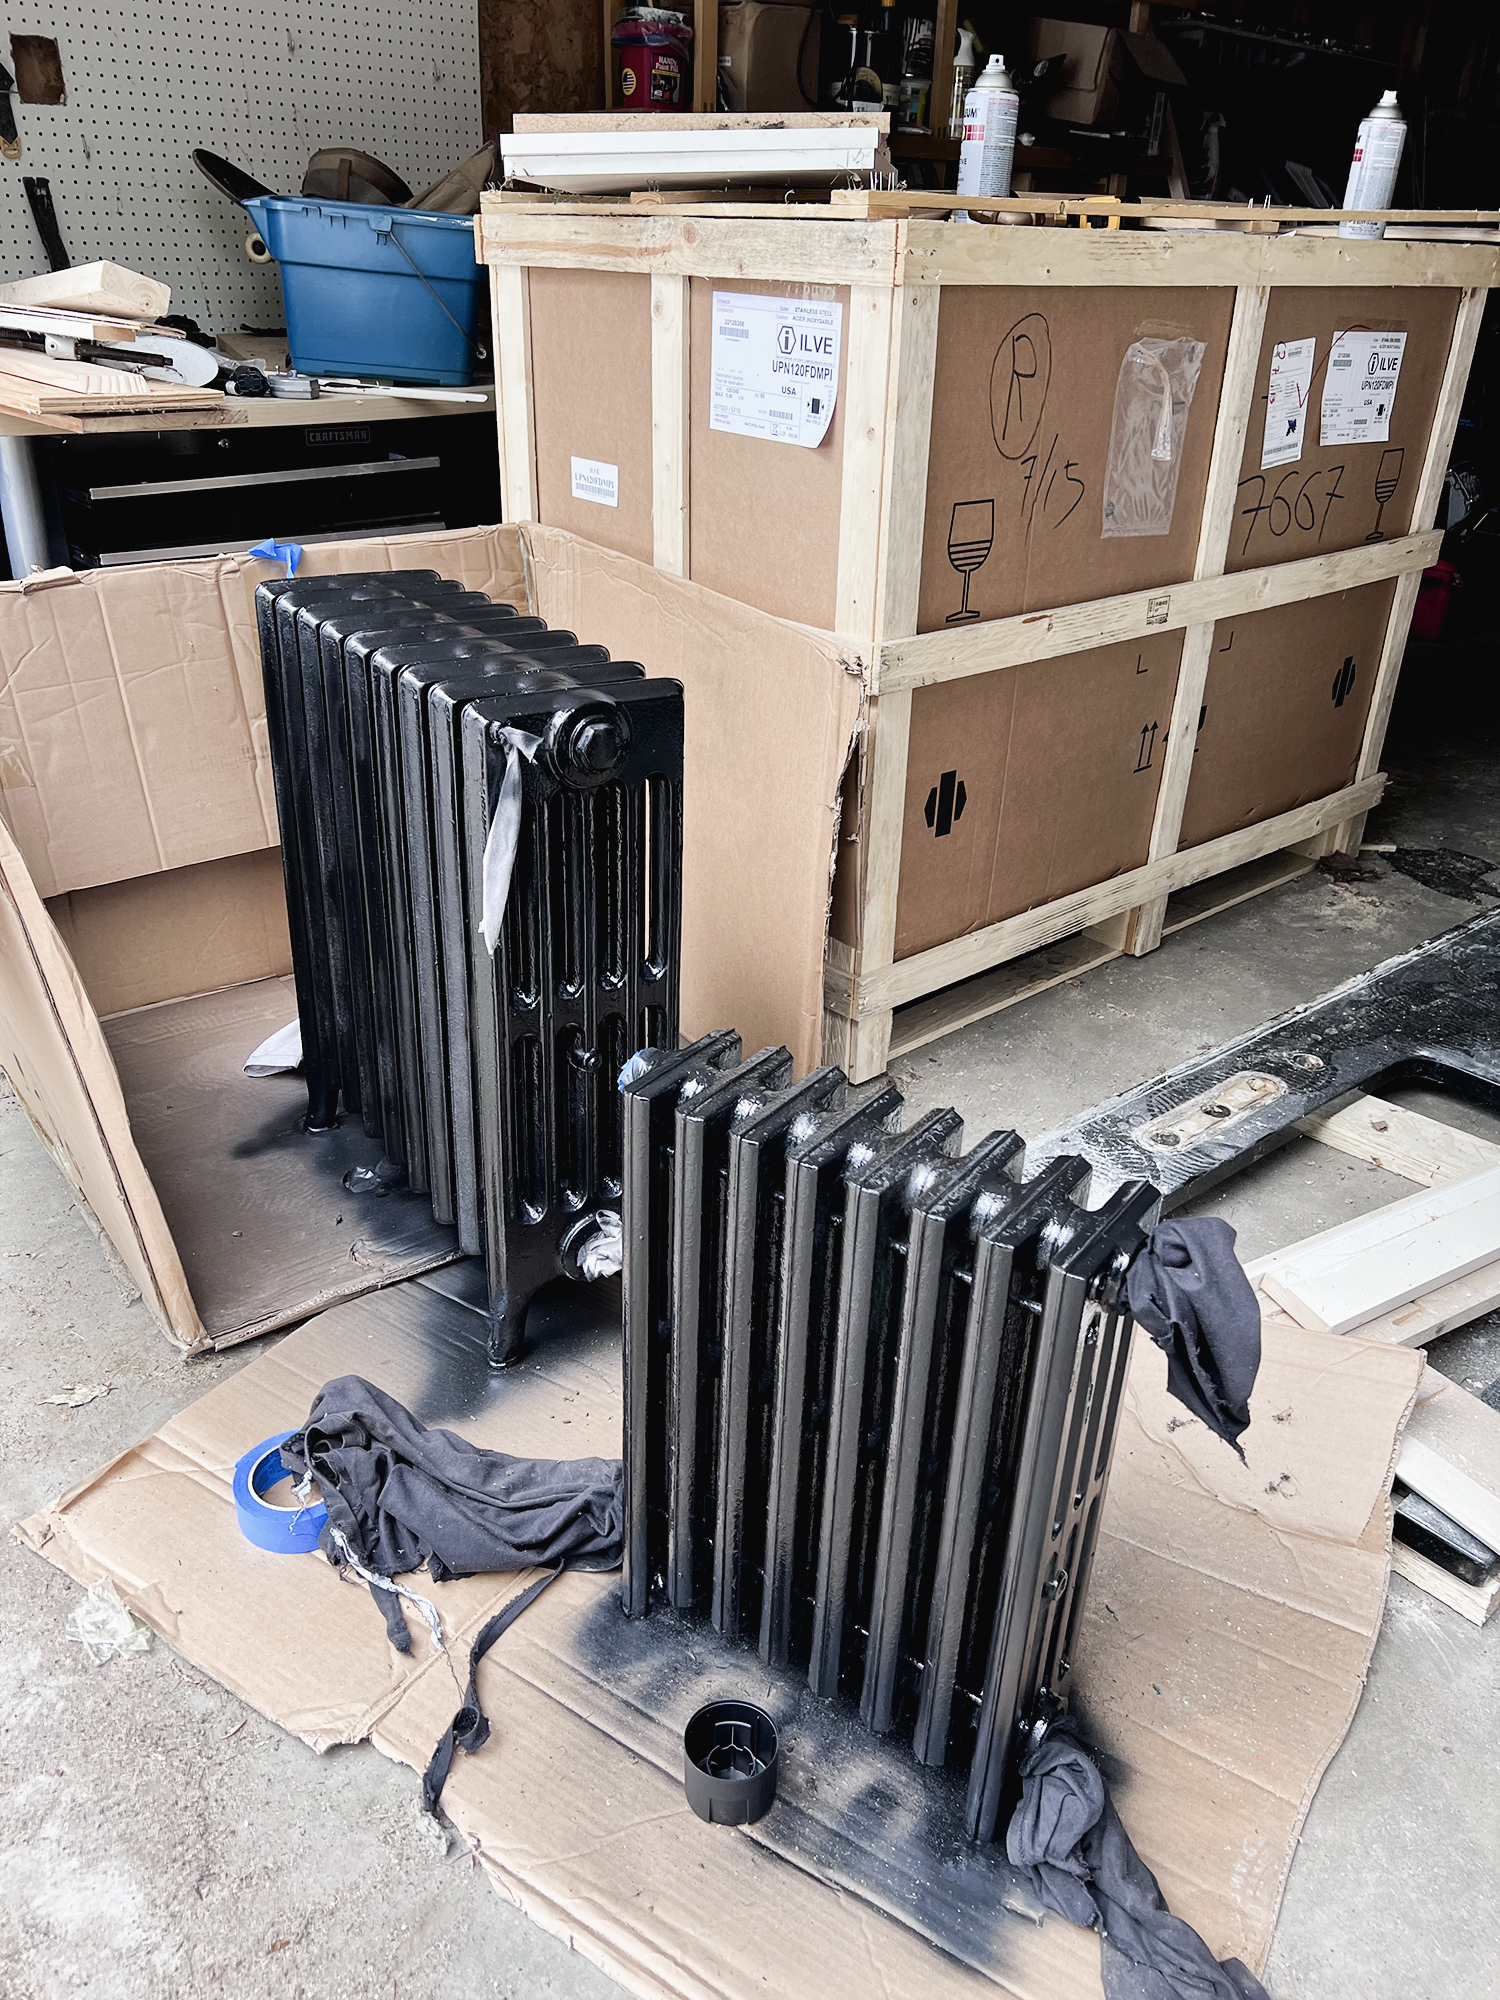 Radiators brushed down, cleaned up and painted black